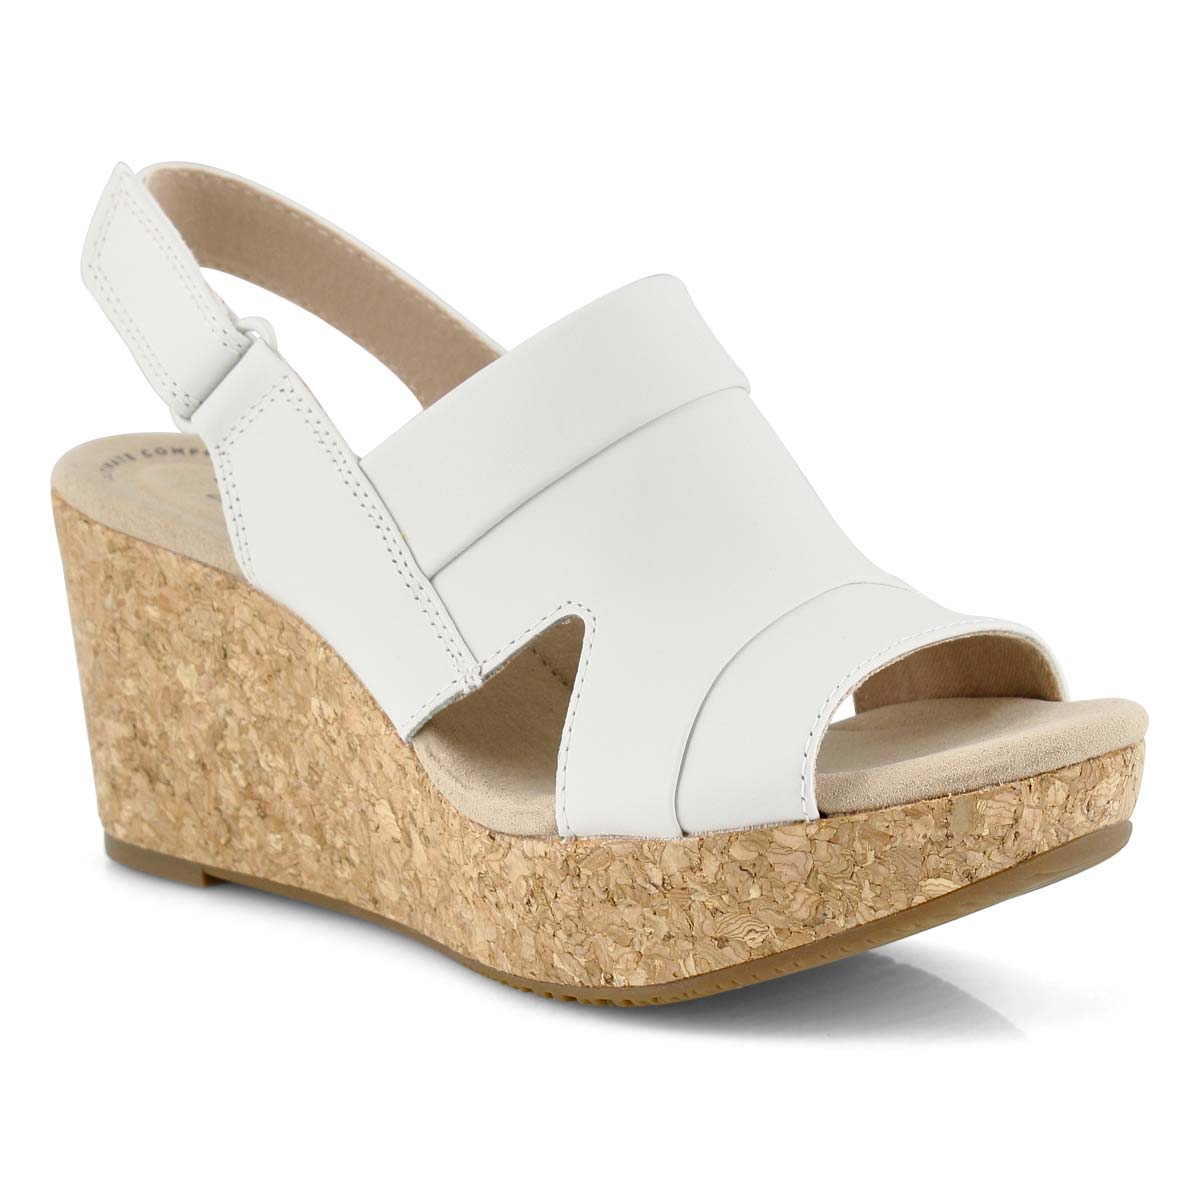 clarks collection women's annadel ivory wedge sandals